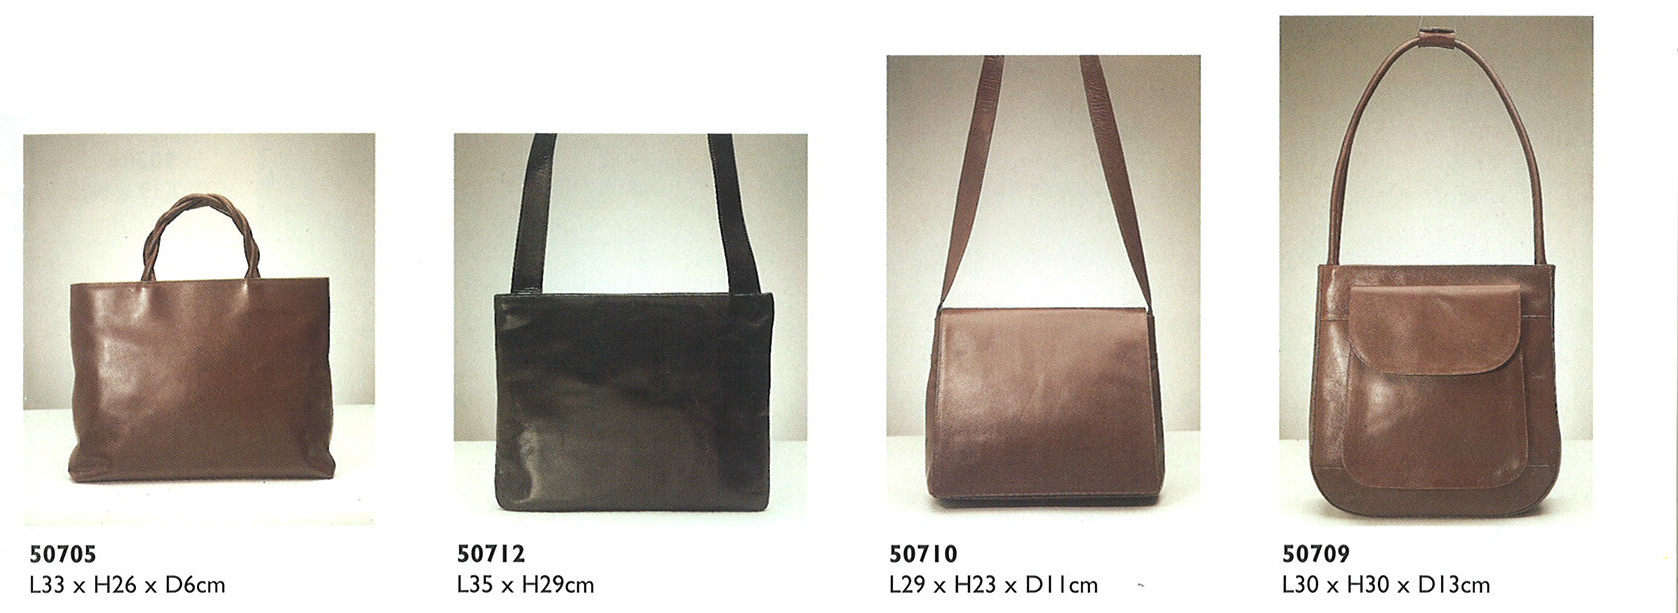 Radley Bags from 1998